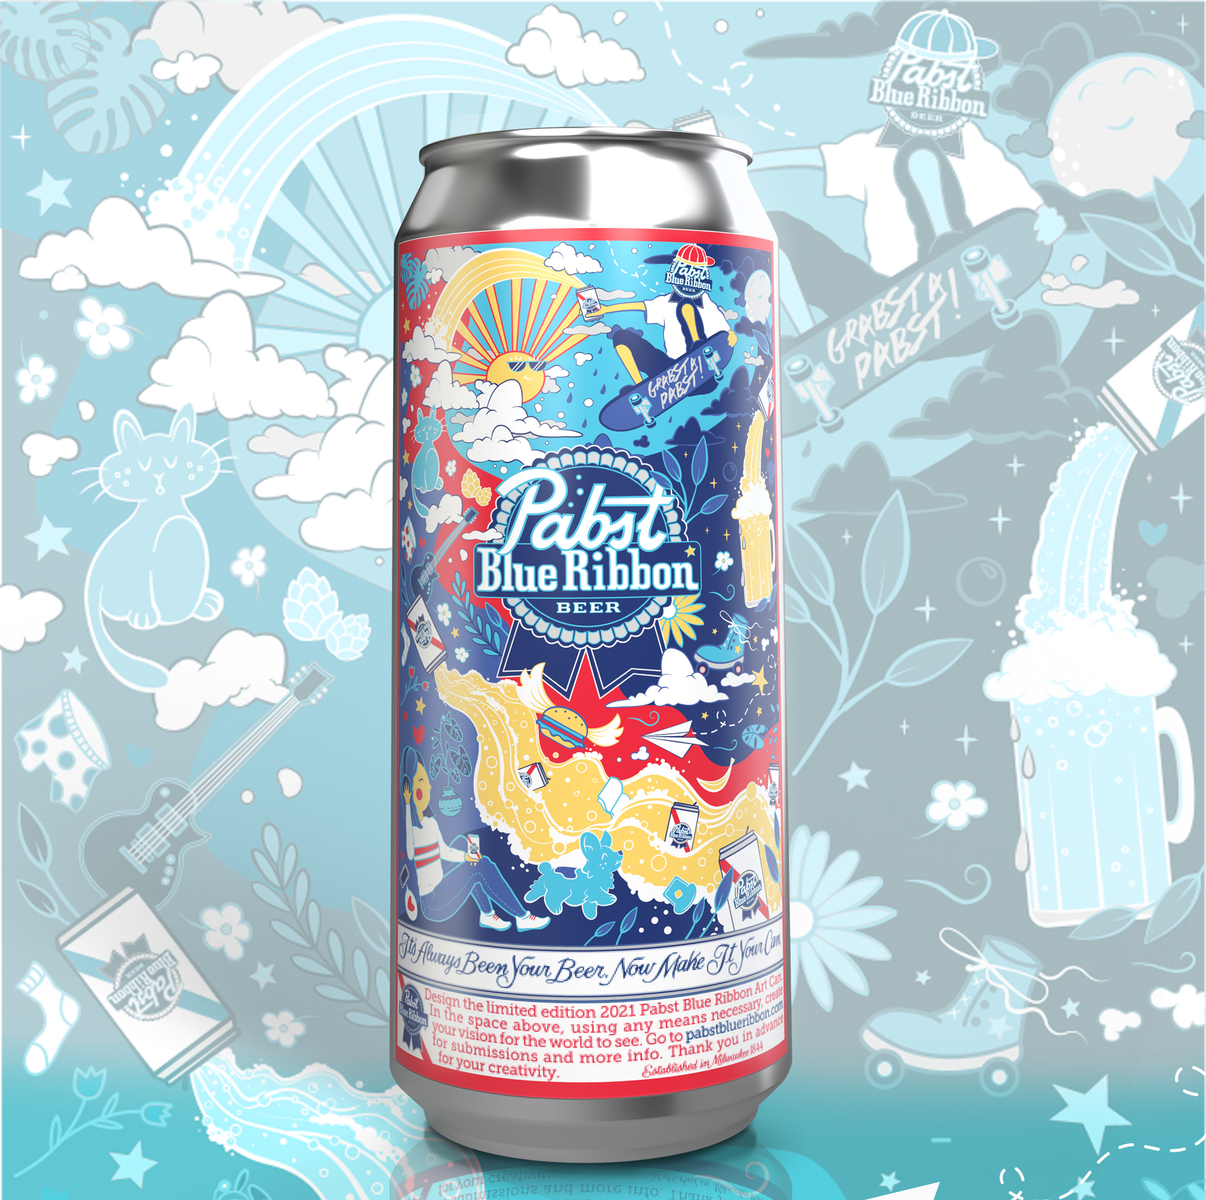 "Nice Day for a Pabst!" PBR Art Can Contest Submission by Jeun Bleu on Dribbble